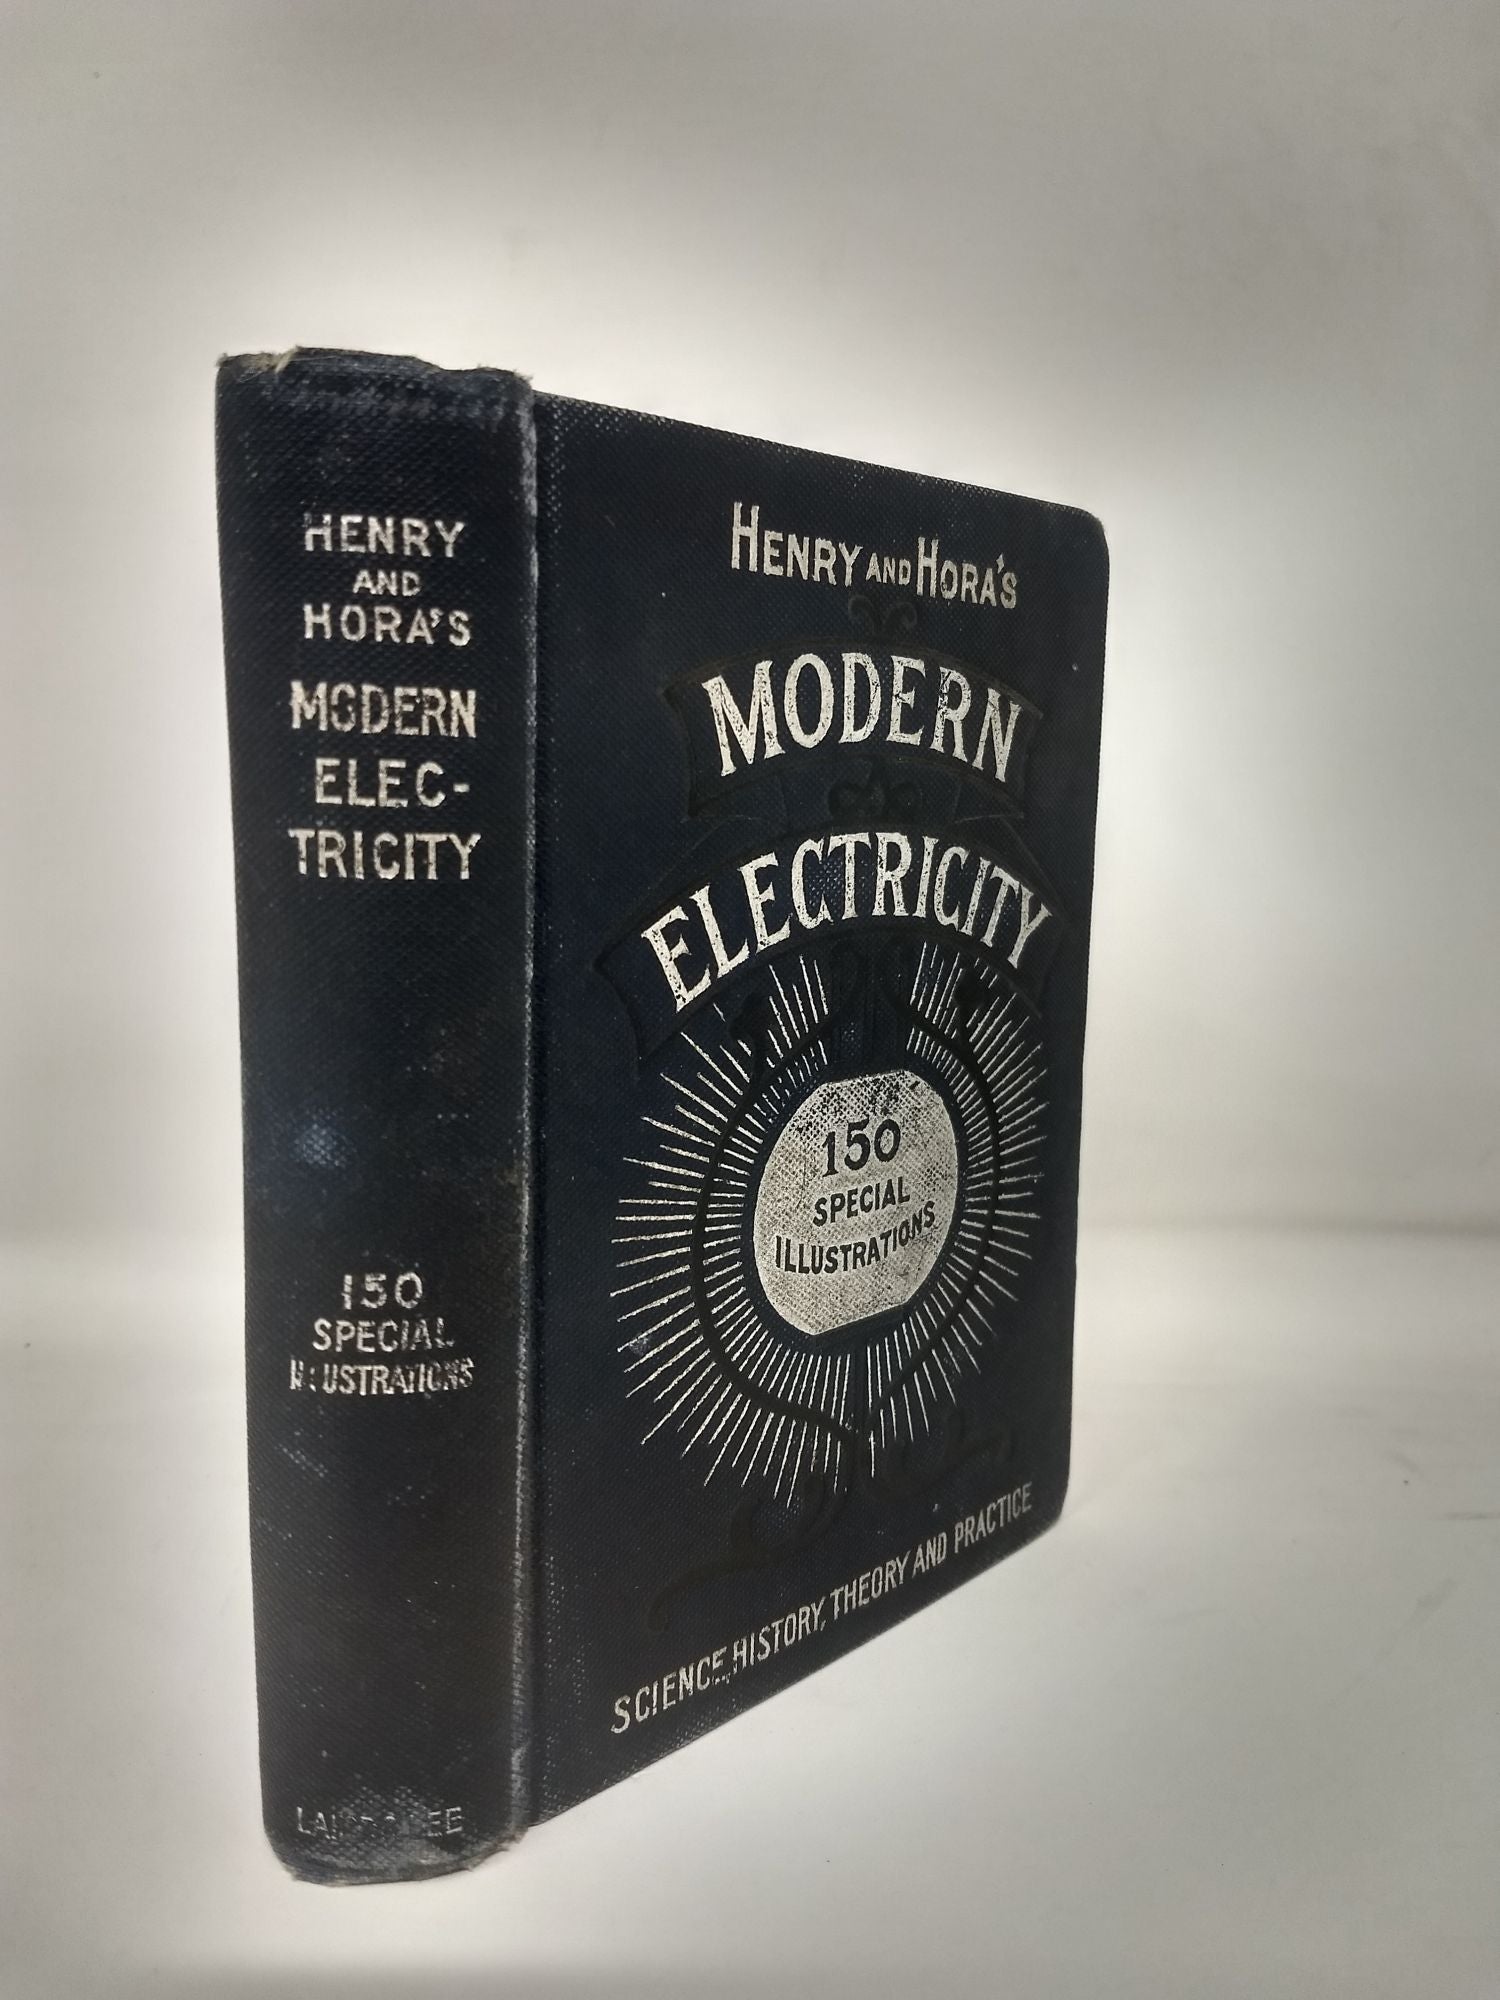 Henry, James and Karel J. Hora - Henry and Hora's Modern Electricity : A Practical Working Encyclopedia - a Manual of Theories, Principles and Applications